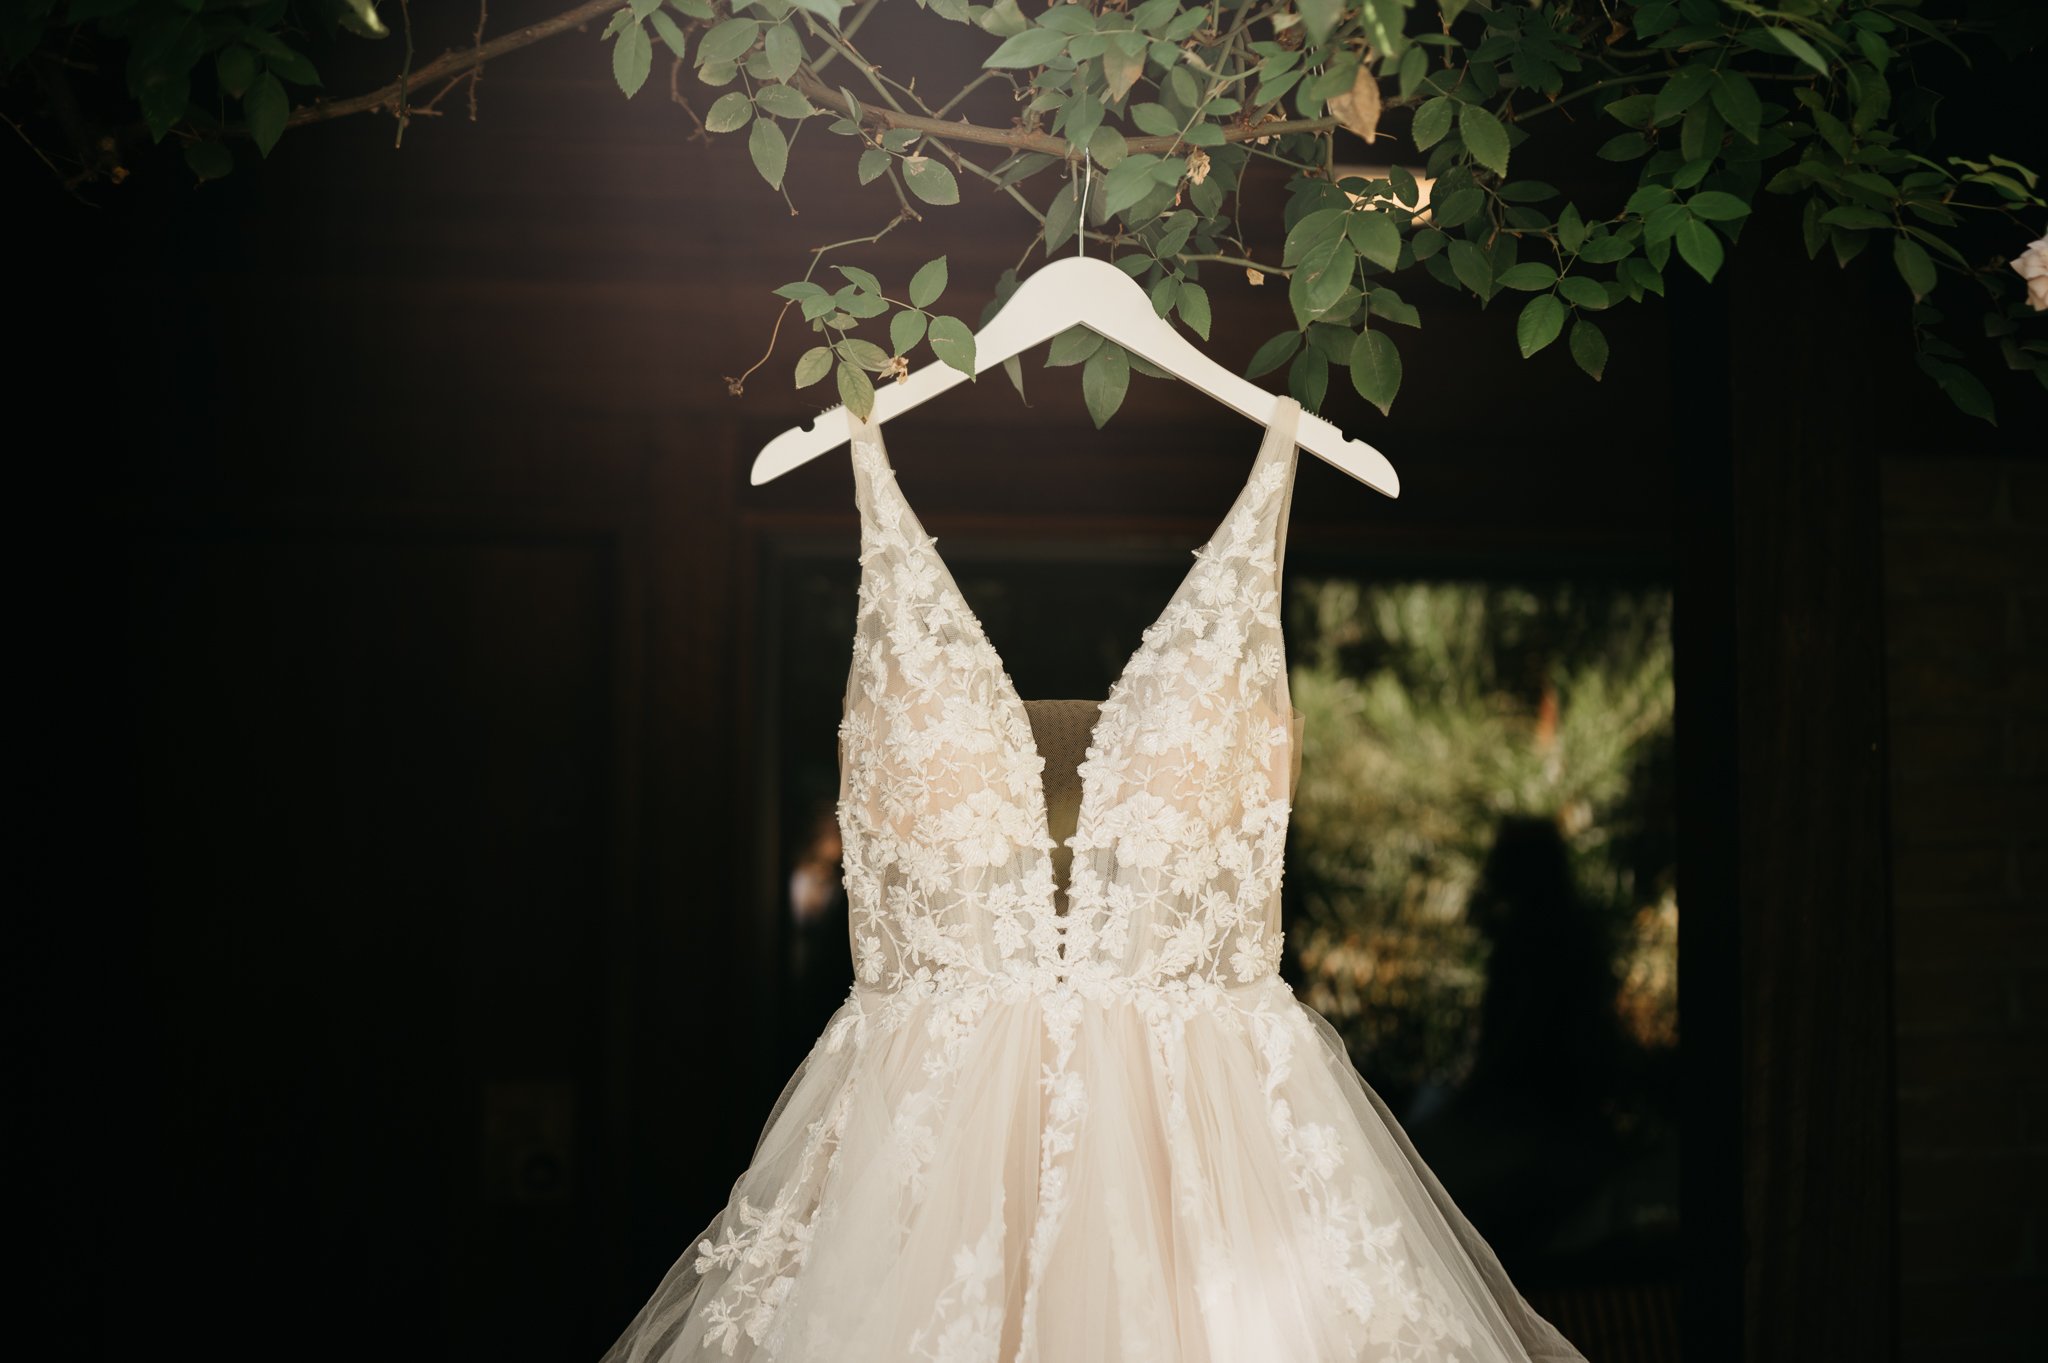 top of sleeveless wedding dress hanging on tree with green leaves on top of hanger